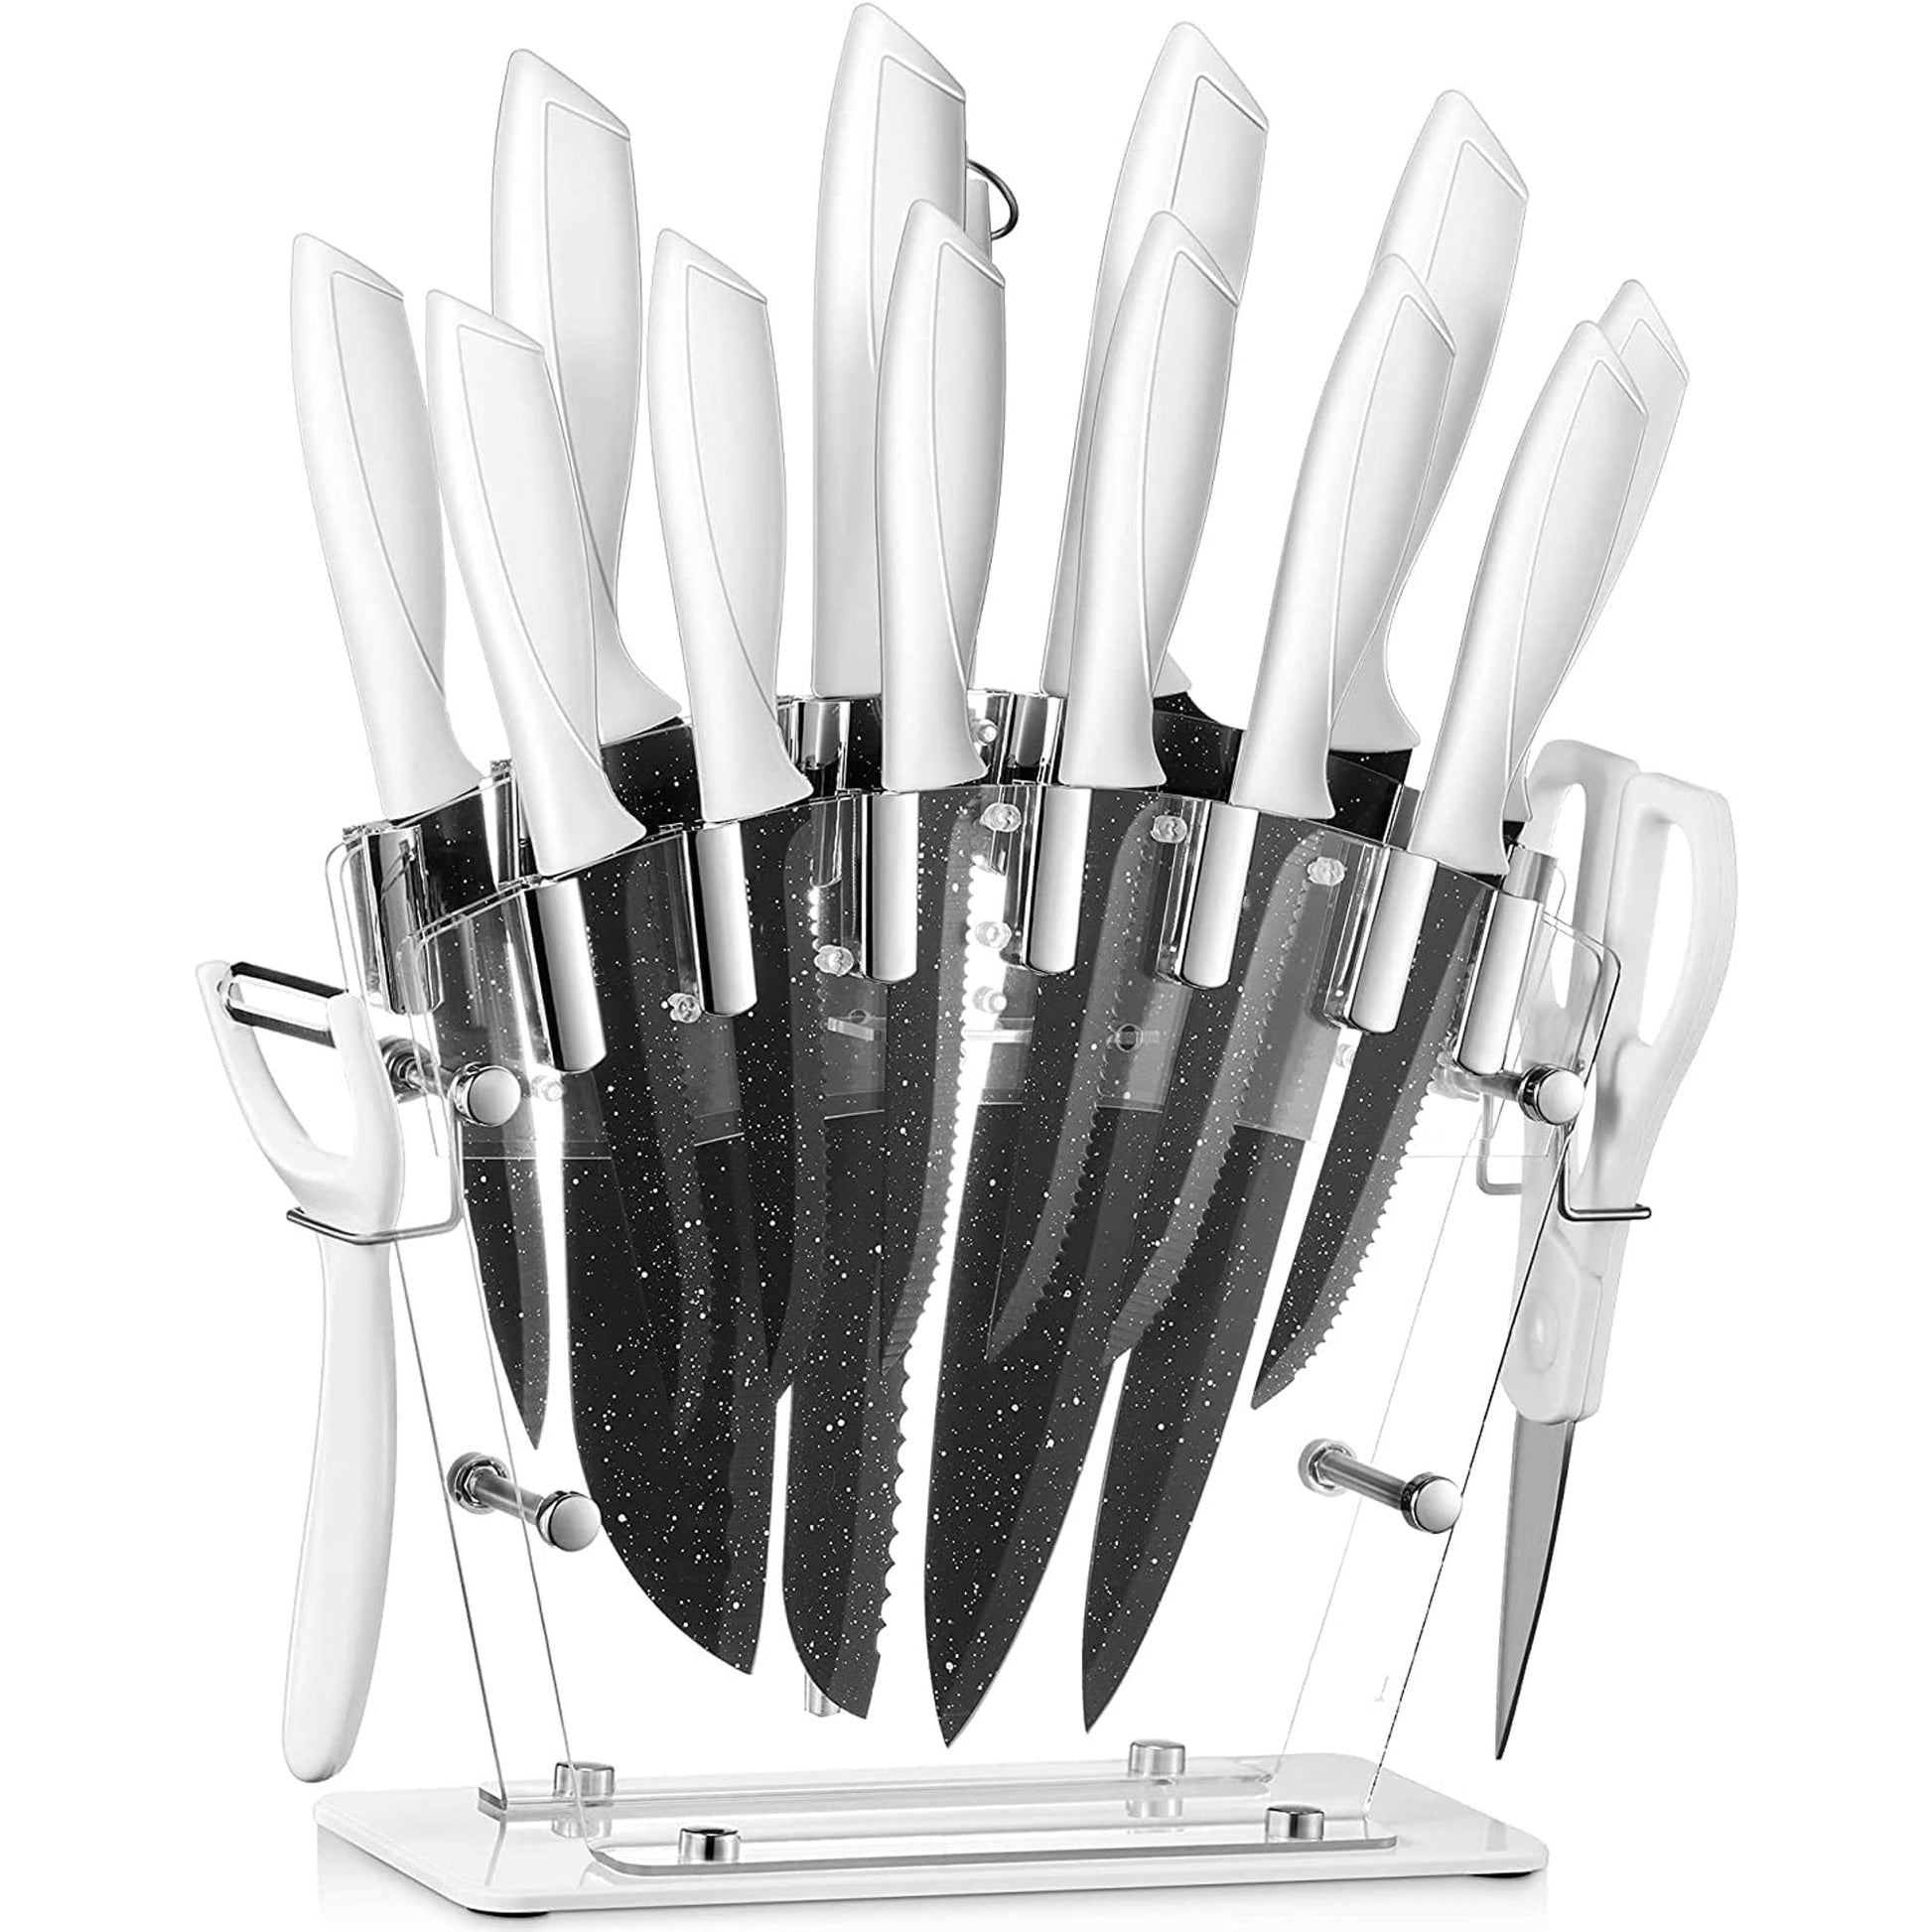 DEIK Knife Set, 16 PCS High Carbon Stainless Steel Kitchen Knife Set,  Non-stick Coated Blade, No Rust, Sharp Cutlery White Knife Set with Acrylic